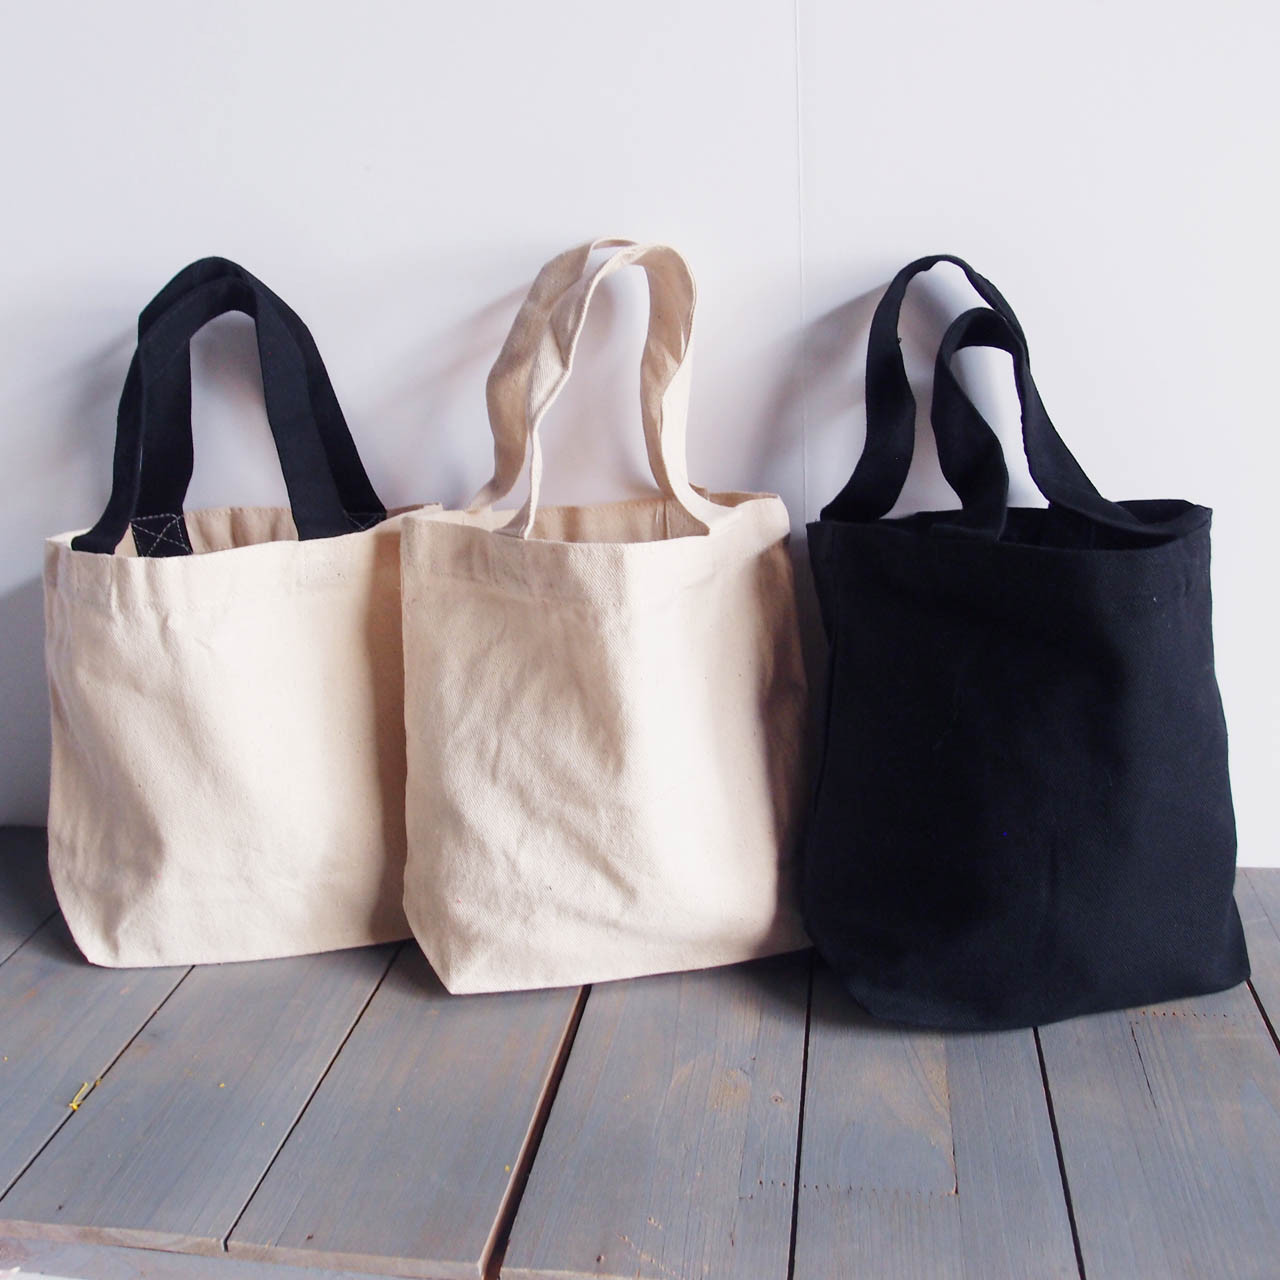 small rolled-handle tote bag, LEMELS